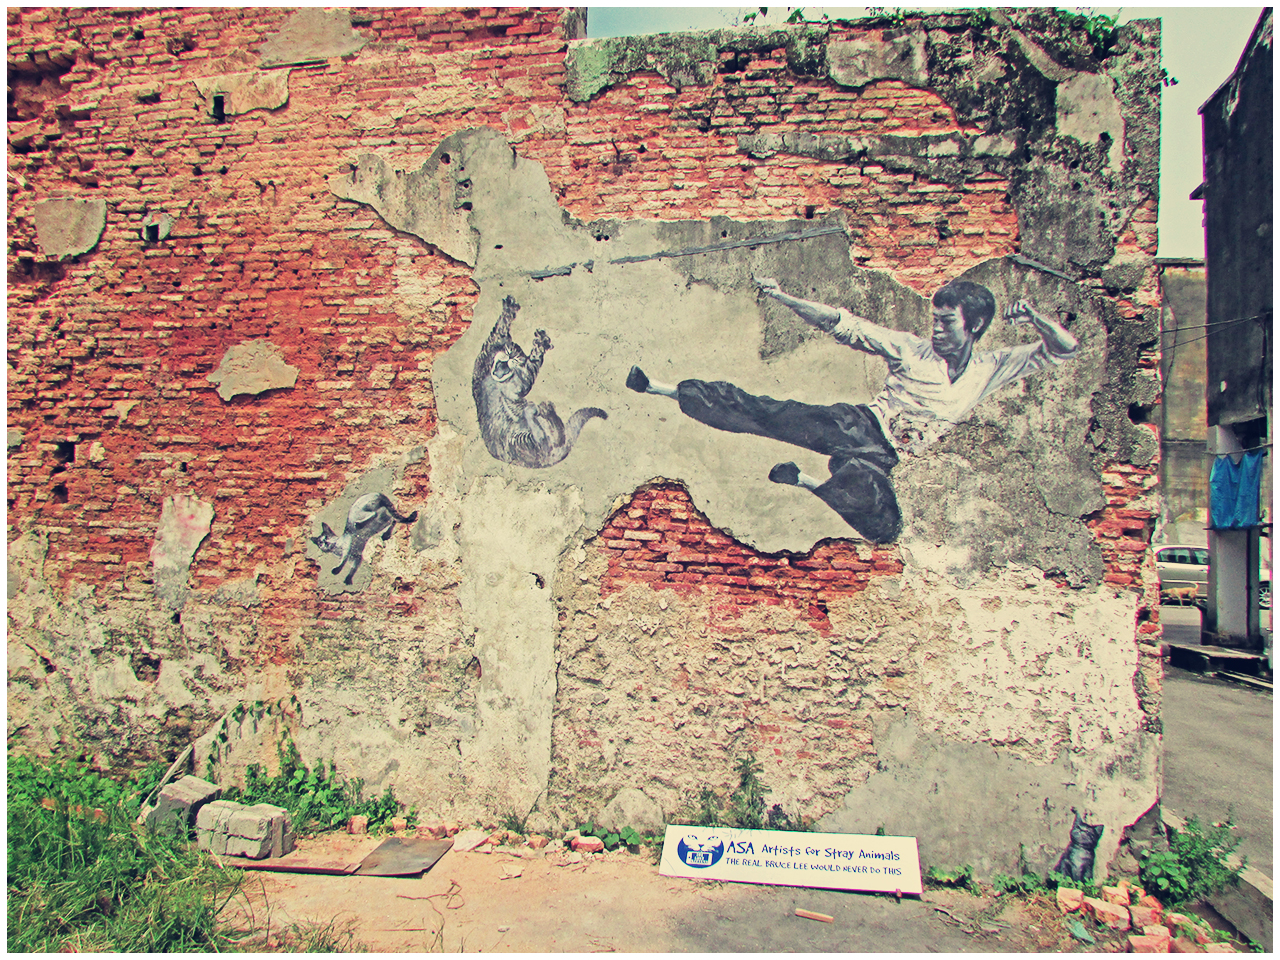 Penang Street Art (The Cat and the 'Bruce Lee') - Travel 2 Penang